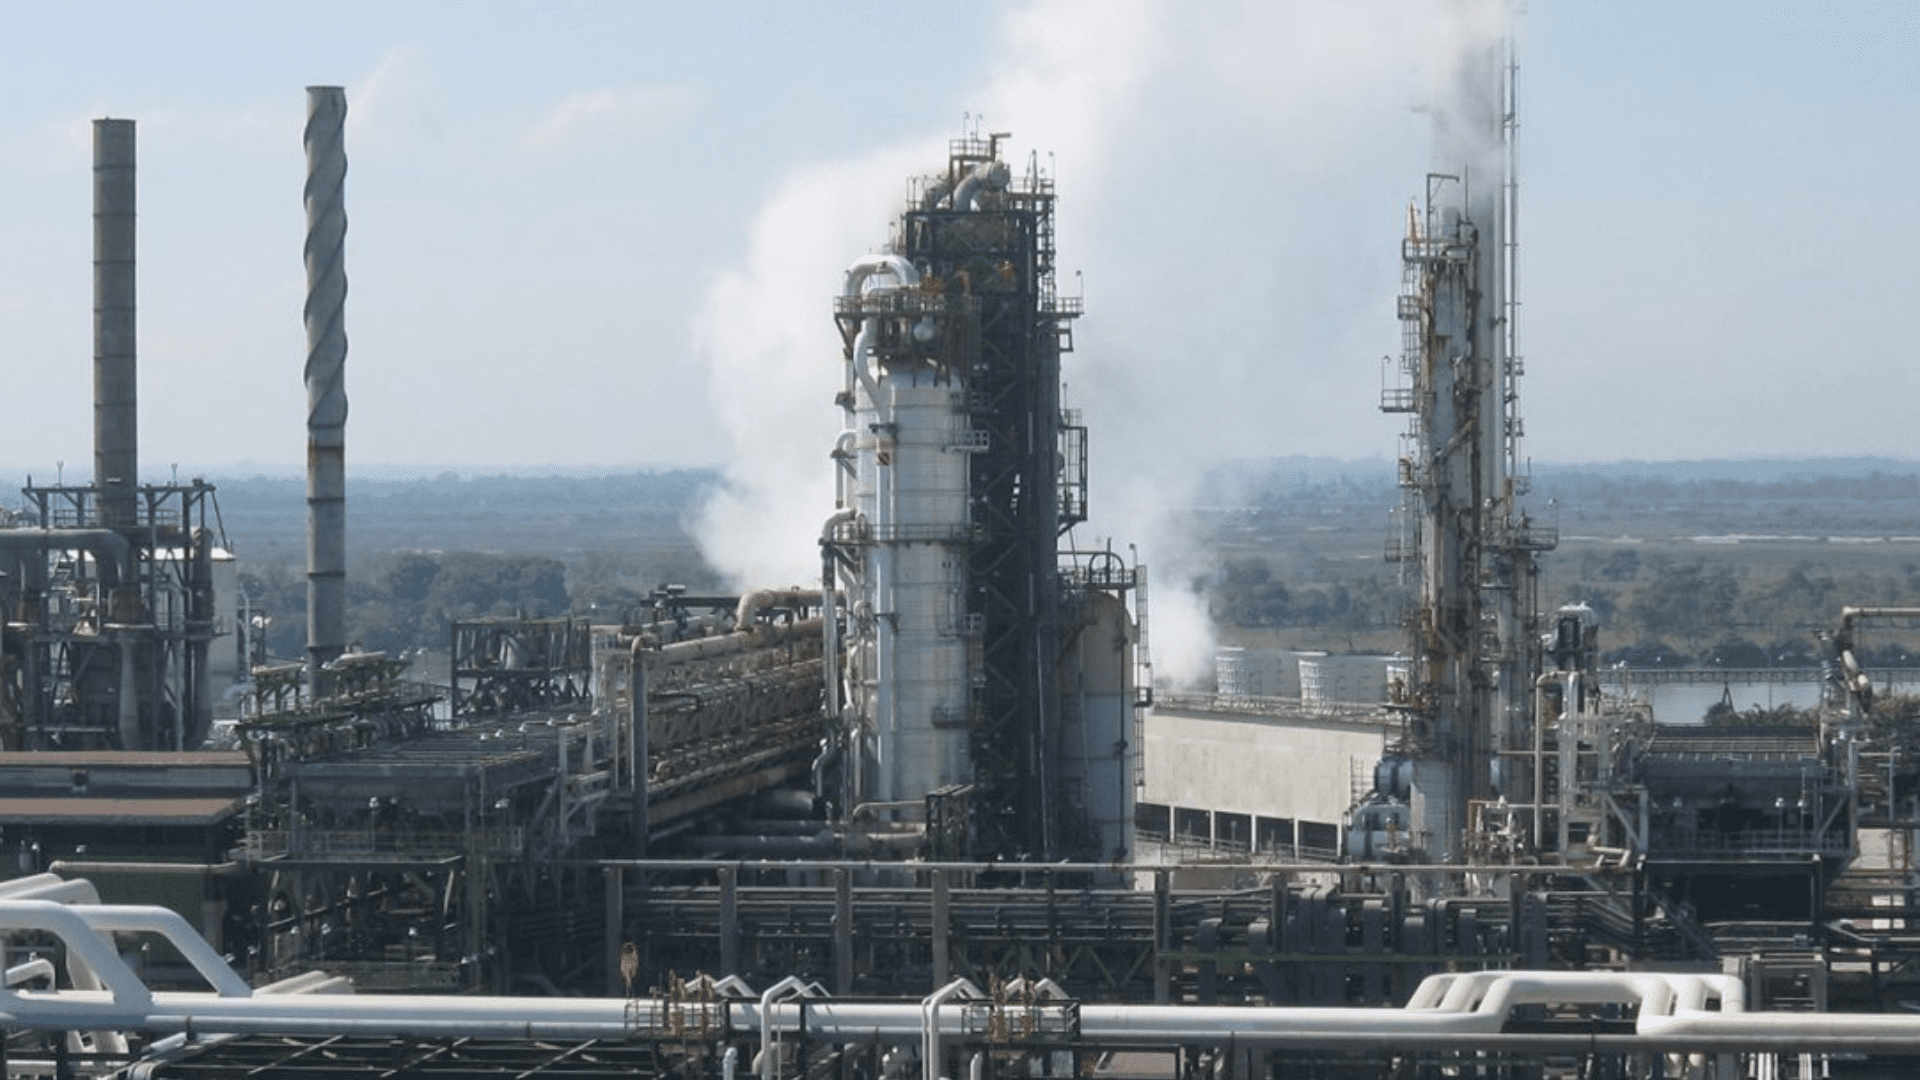 A fire at a refinery operated by Mexican state oil company Pemex injured four people on 23 May.